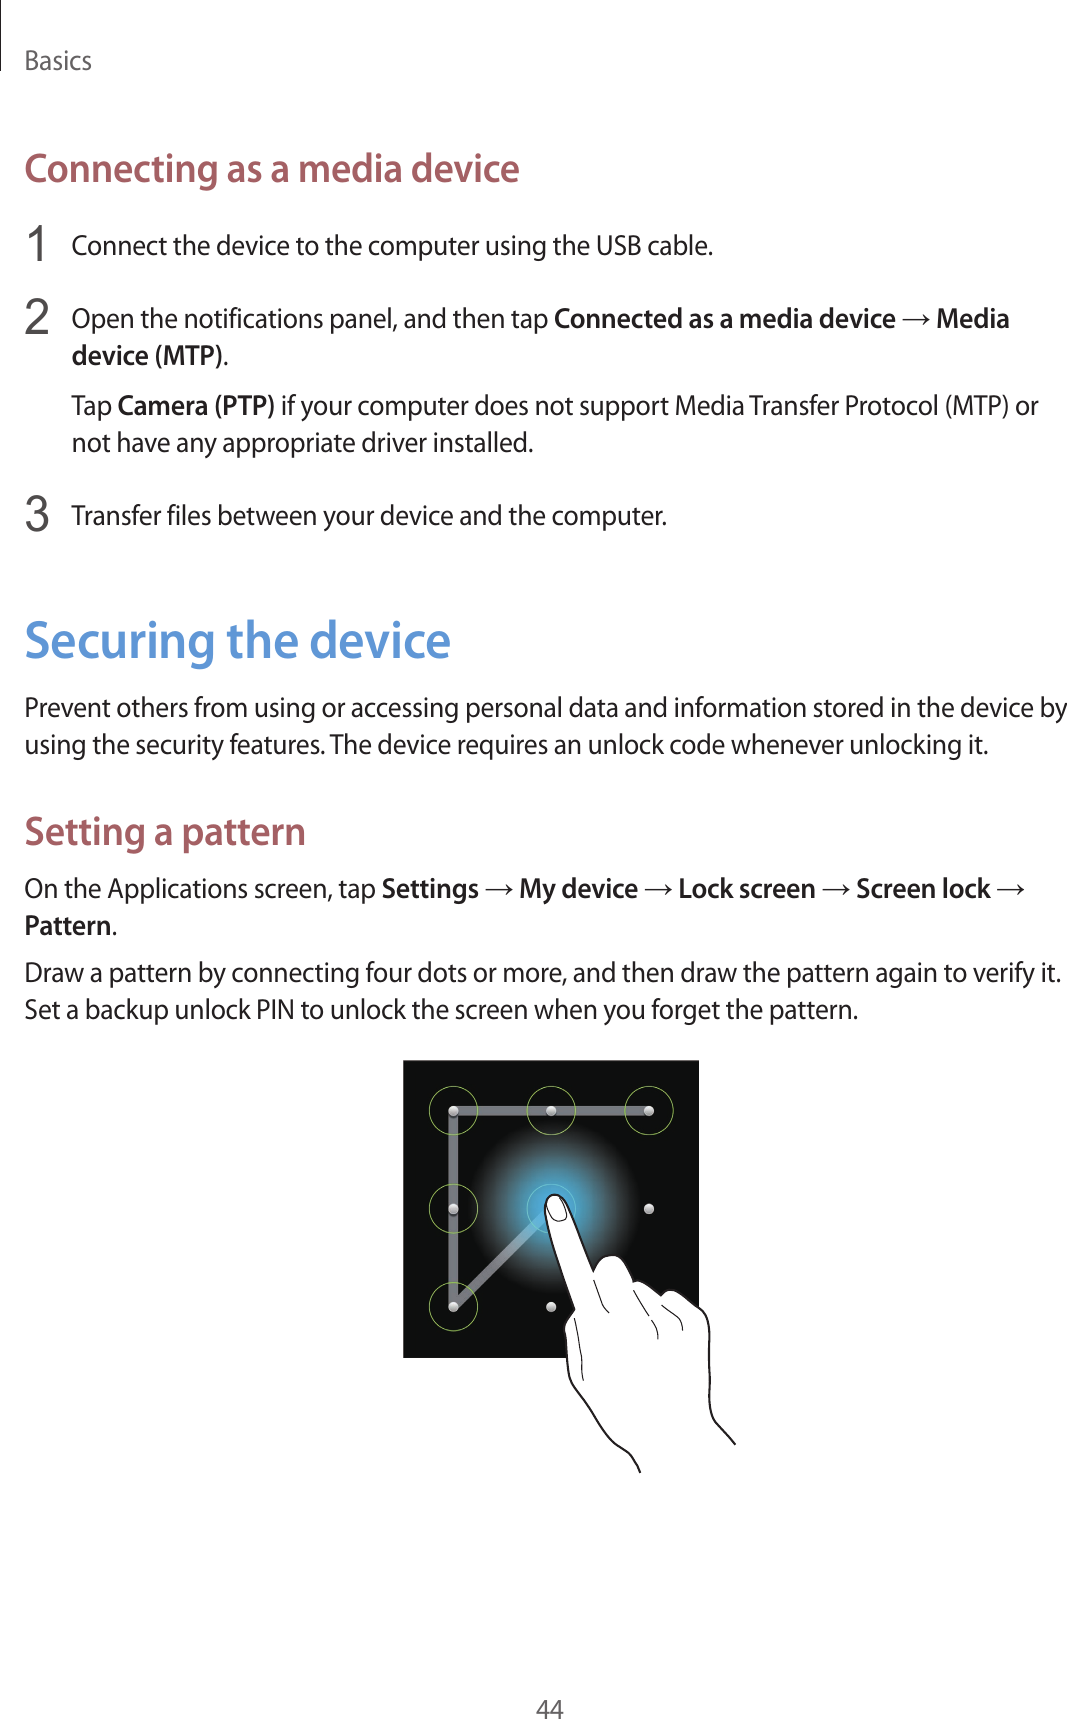 Basics44Connecting as a media device1  Connect the device to the computer using the USB cable.2  Open the notifications panel, and then tap Connected as a media device → Media device (MTP).Tap Camera (PTP) if your computer does not support Media Transfer Protocol (MTP) or not have any appropriate driver installed.3  Transfer files between your device and the computer.Securing the devicePrevent others from using or accessing personal data and information stored in the device by using the security features. The device requires an unlock code whenever unlocking it.Setting a patternOn the Applications screen, tap Settings → My device → Lock screen → Screen lock → Pattern.Draw a pattern by connecting four dots or more, and then draw the pattern again to verify it. Set a backup unlock PIN to unlock the screen when you forget the pattern.